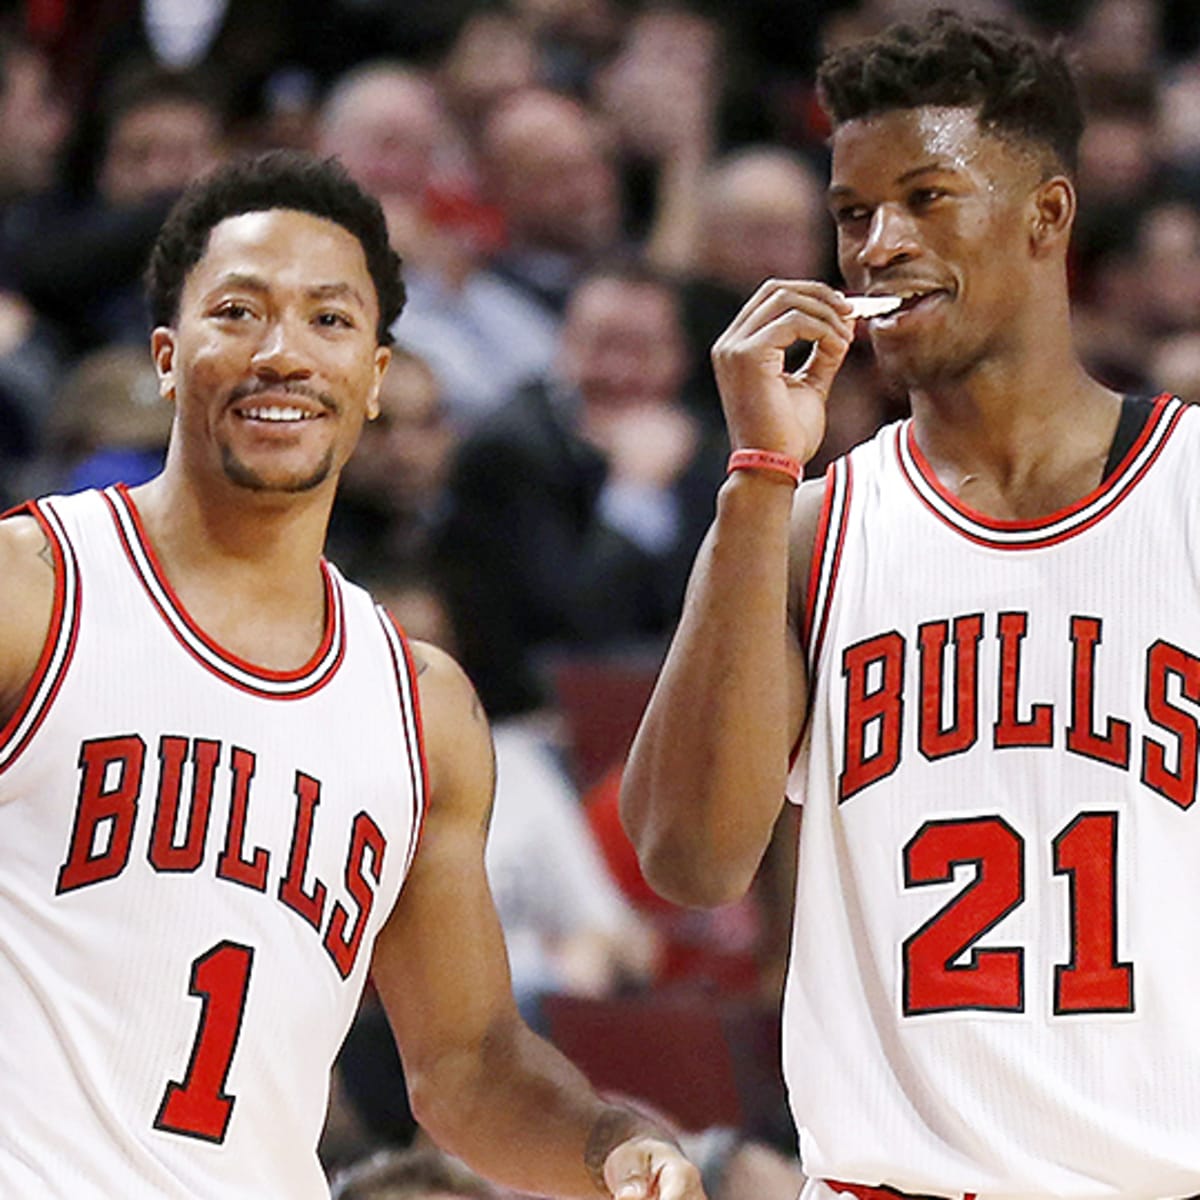 Sh#t! He Talking to Derrick Rose Like That?”: Rookie Jimmy Butler Was  Surprised By the Bulls Culture, With No Special Treatment to 2011 MVP - The  SportsRush